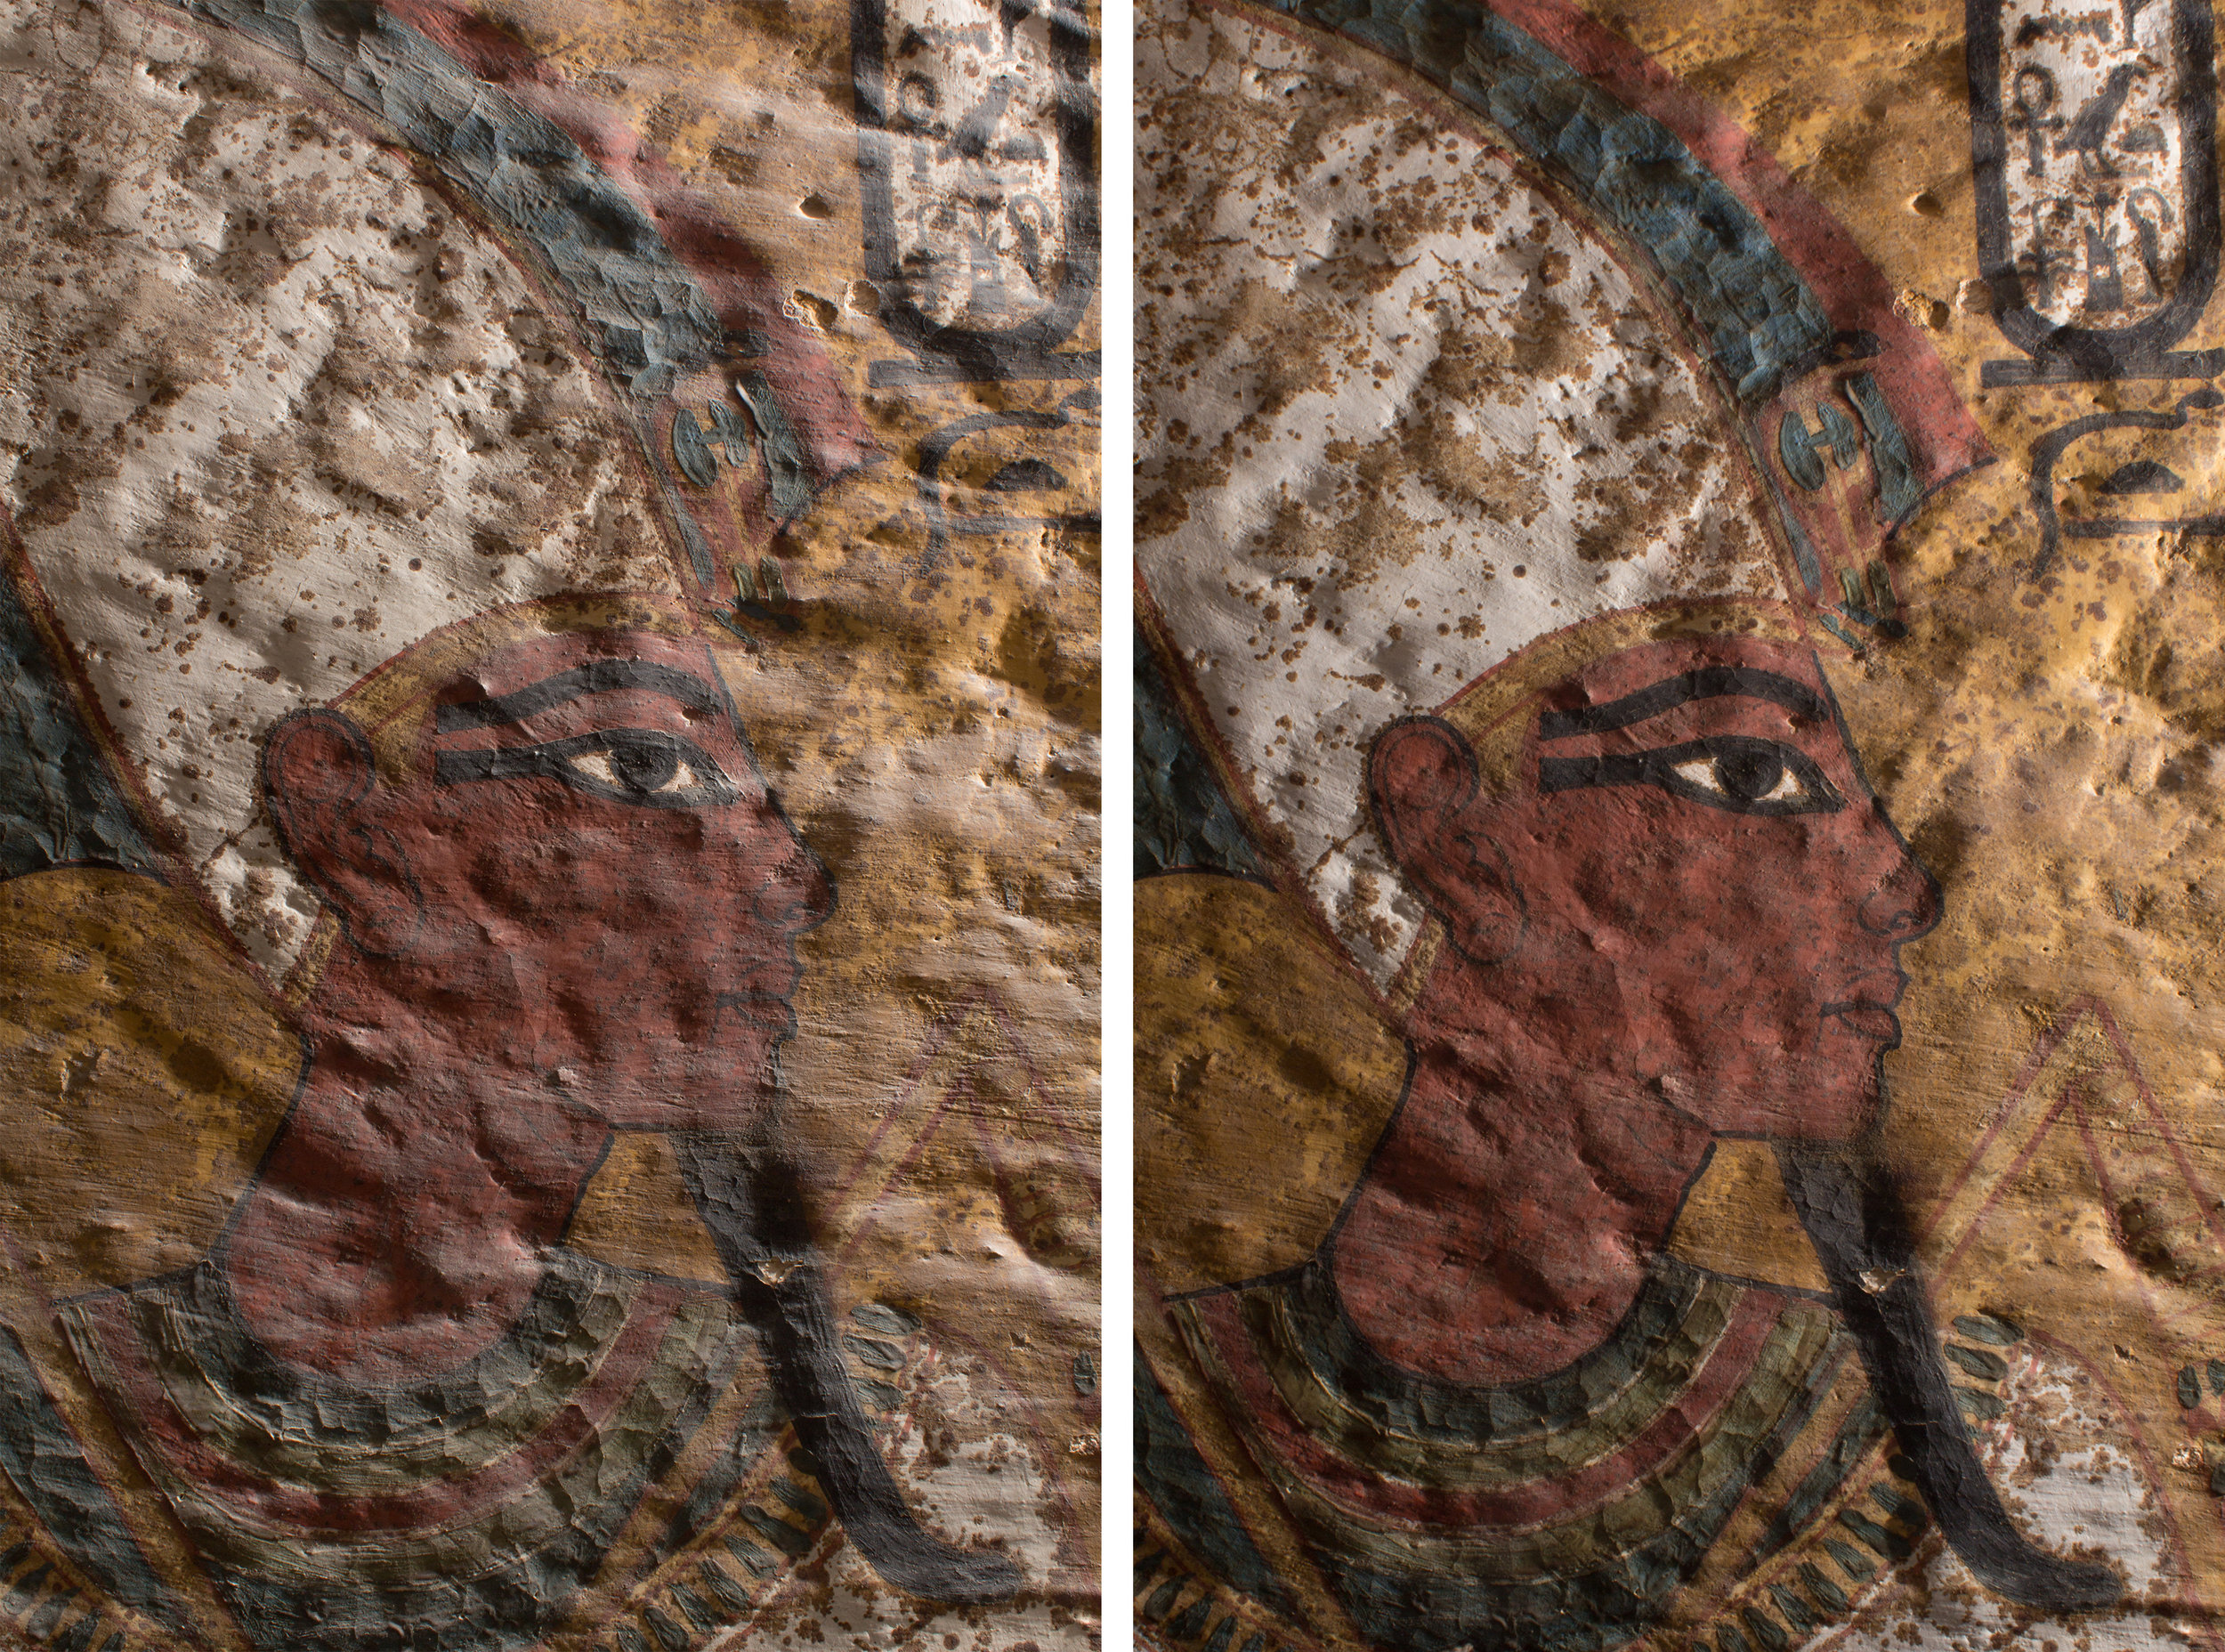  The wall painting before (left) and after (right) dust reduction, shown in raking light.  Image © J. Paul Getty Trust, 2016 